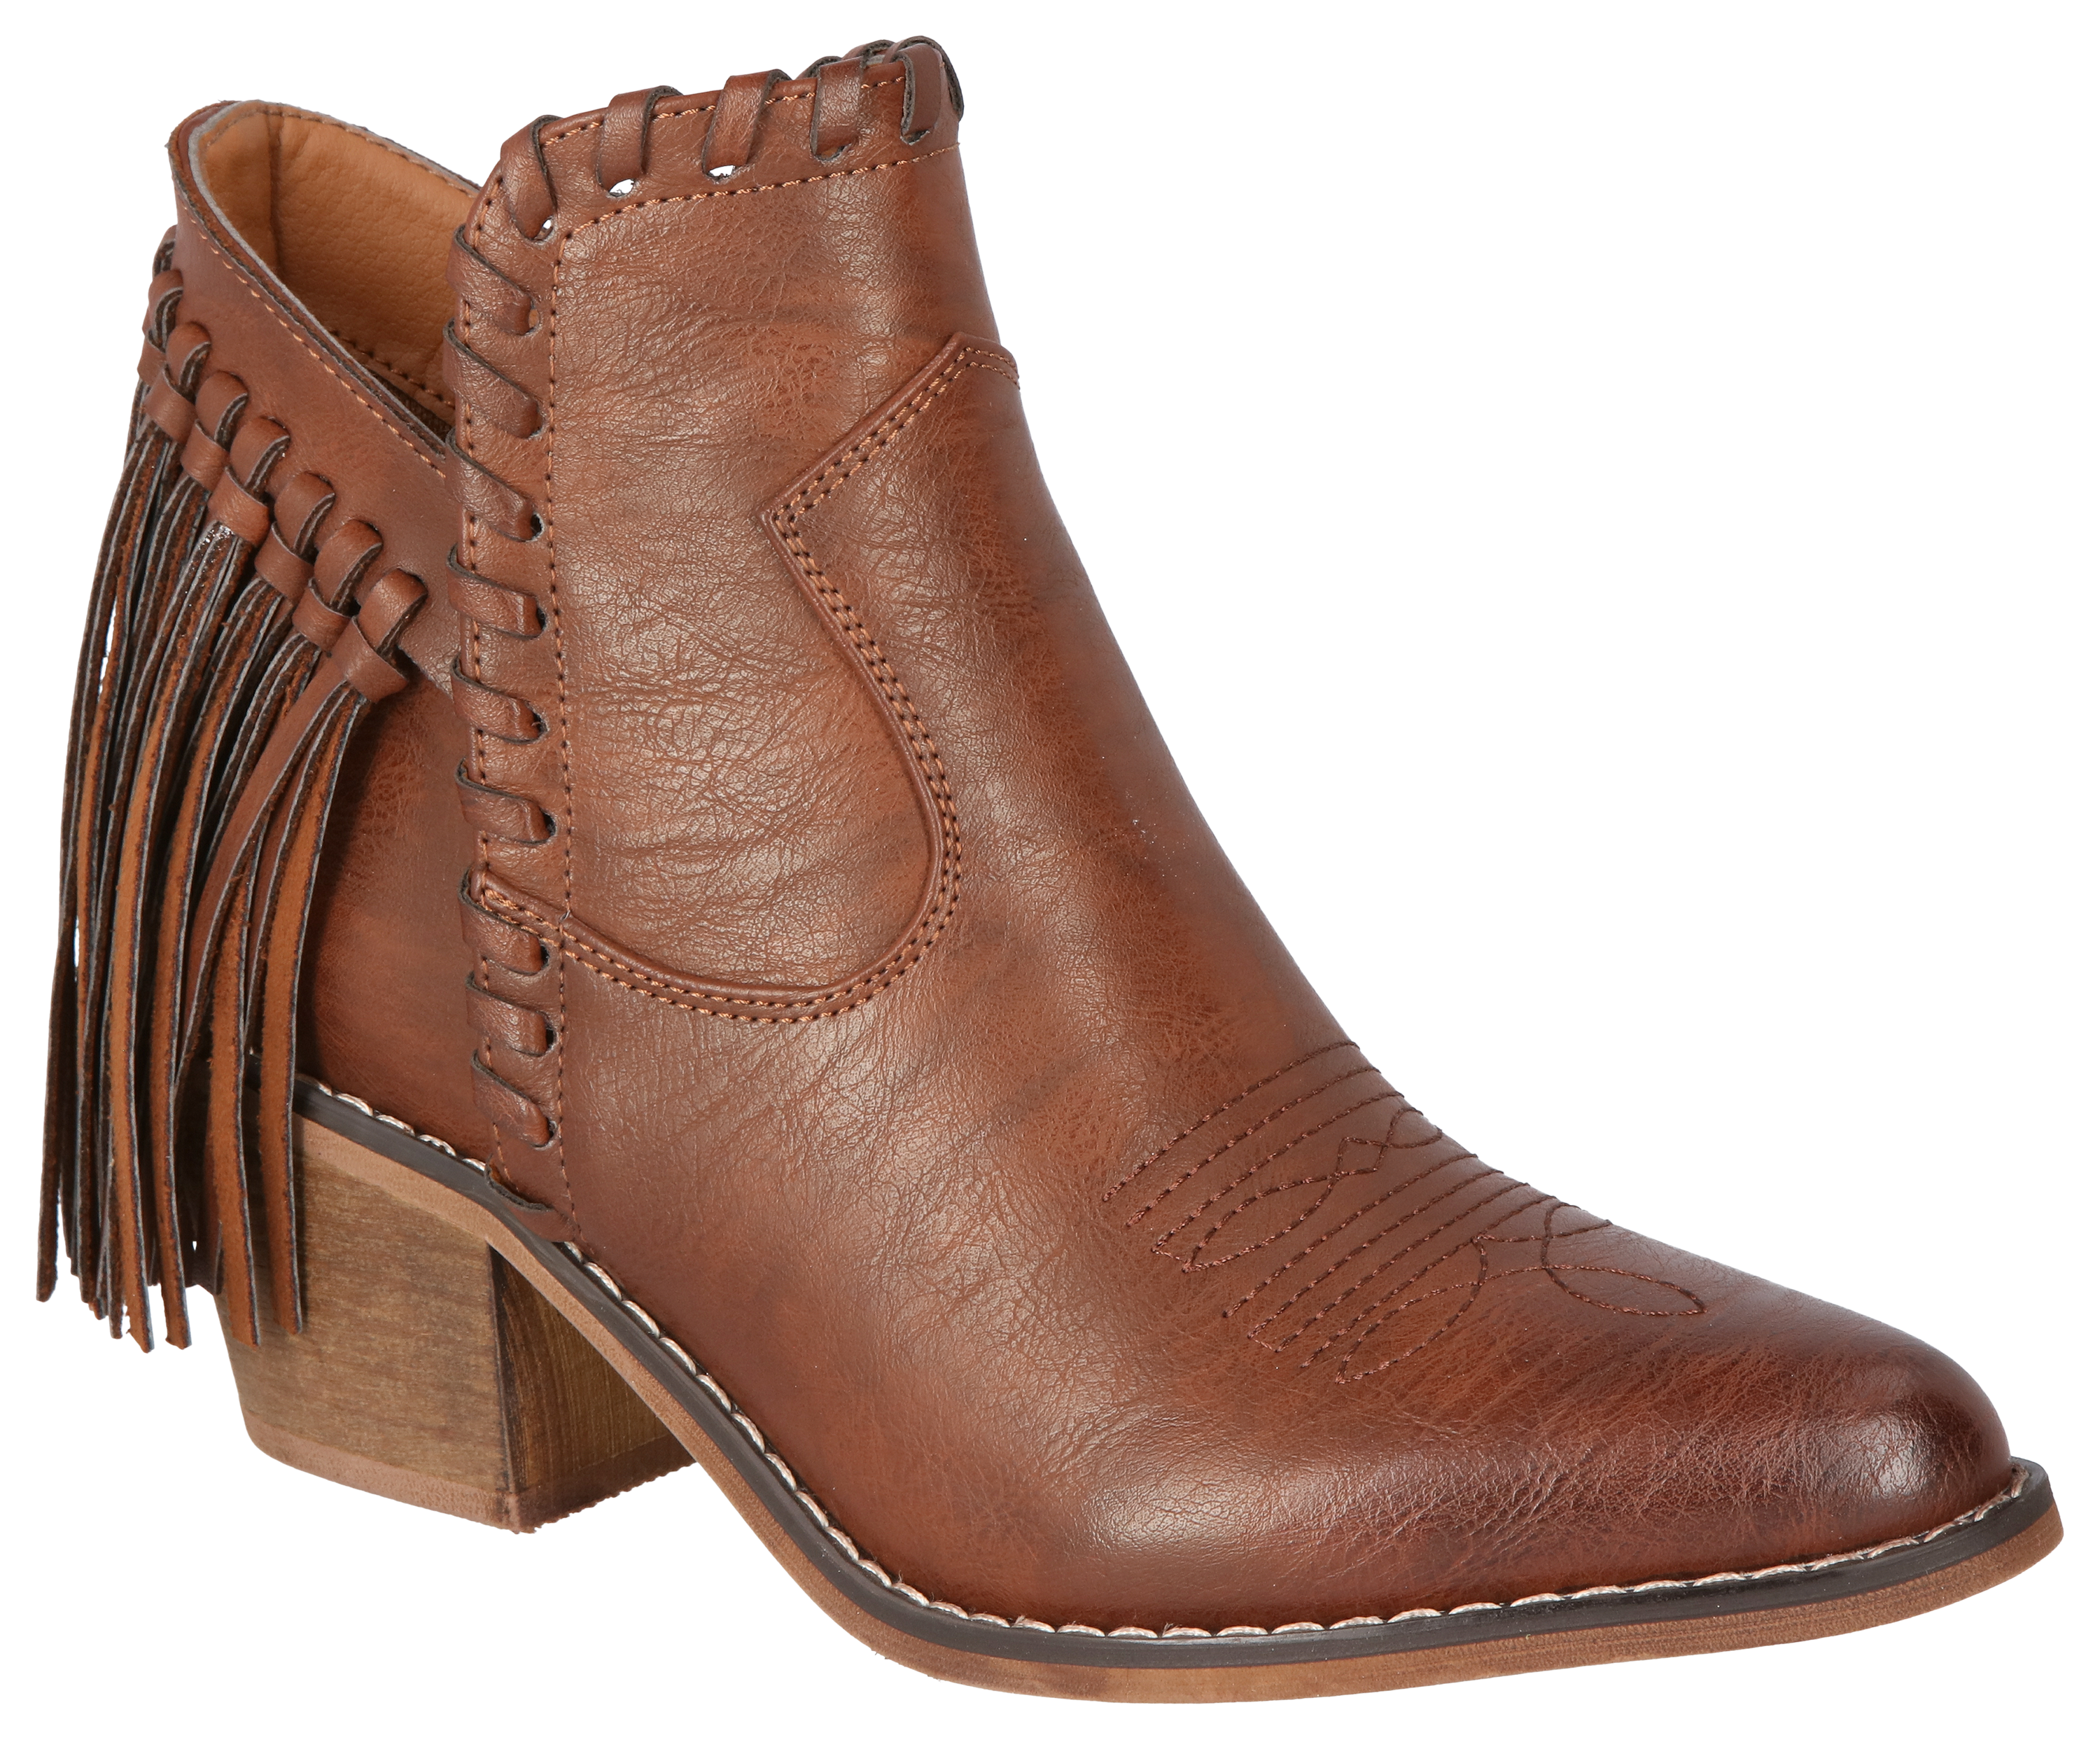 Natural Reflections Keykee Tassel Boots for Ladies - Whiskey - 6.5M